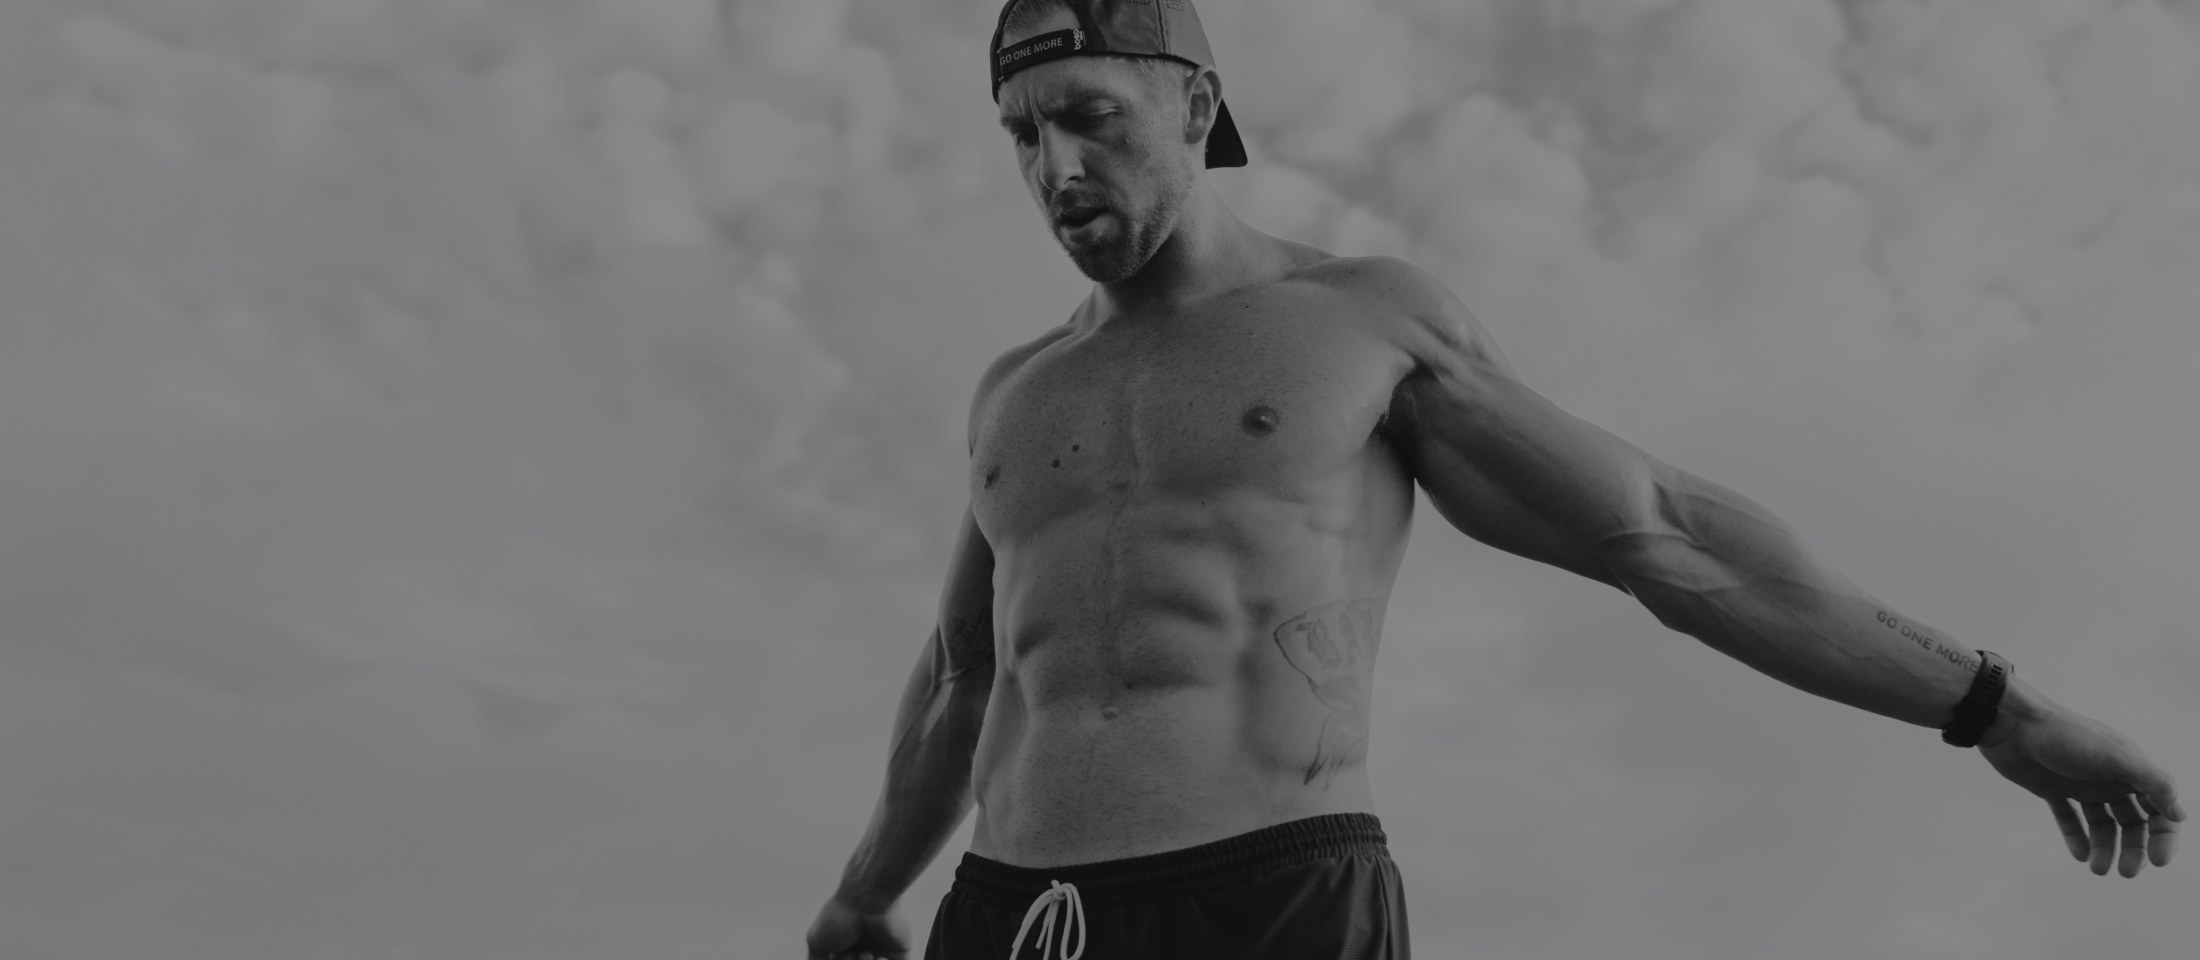 Team Never Quit / Nick Bare: Founder & CEO Bare Performance Nutrition and  Host of the The Bare Performance Podcast